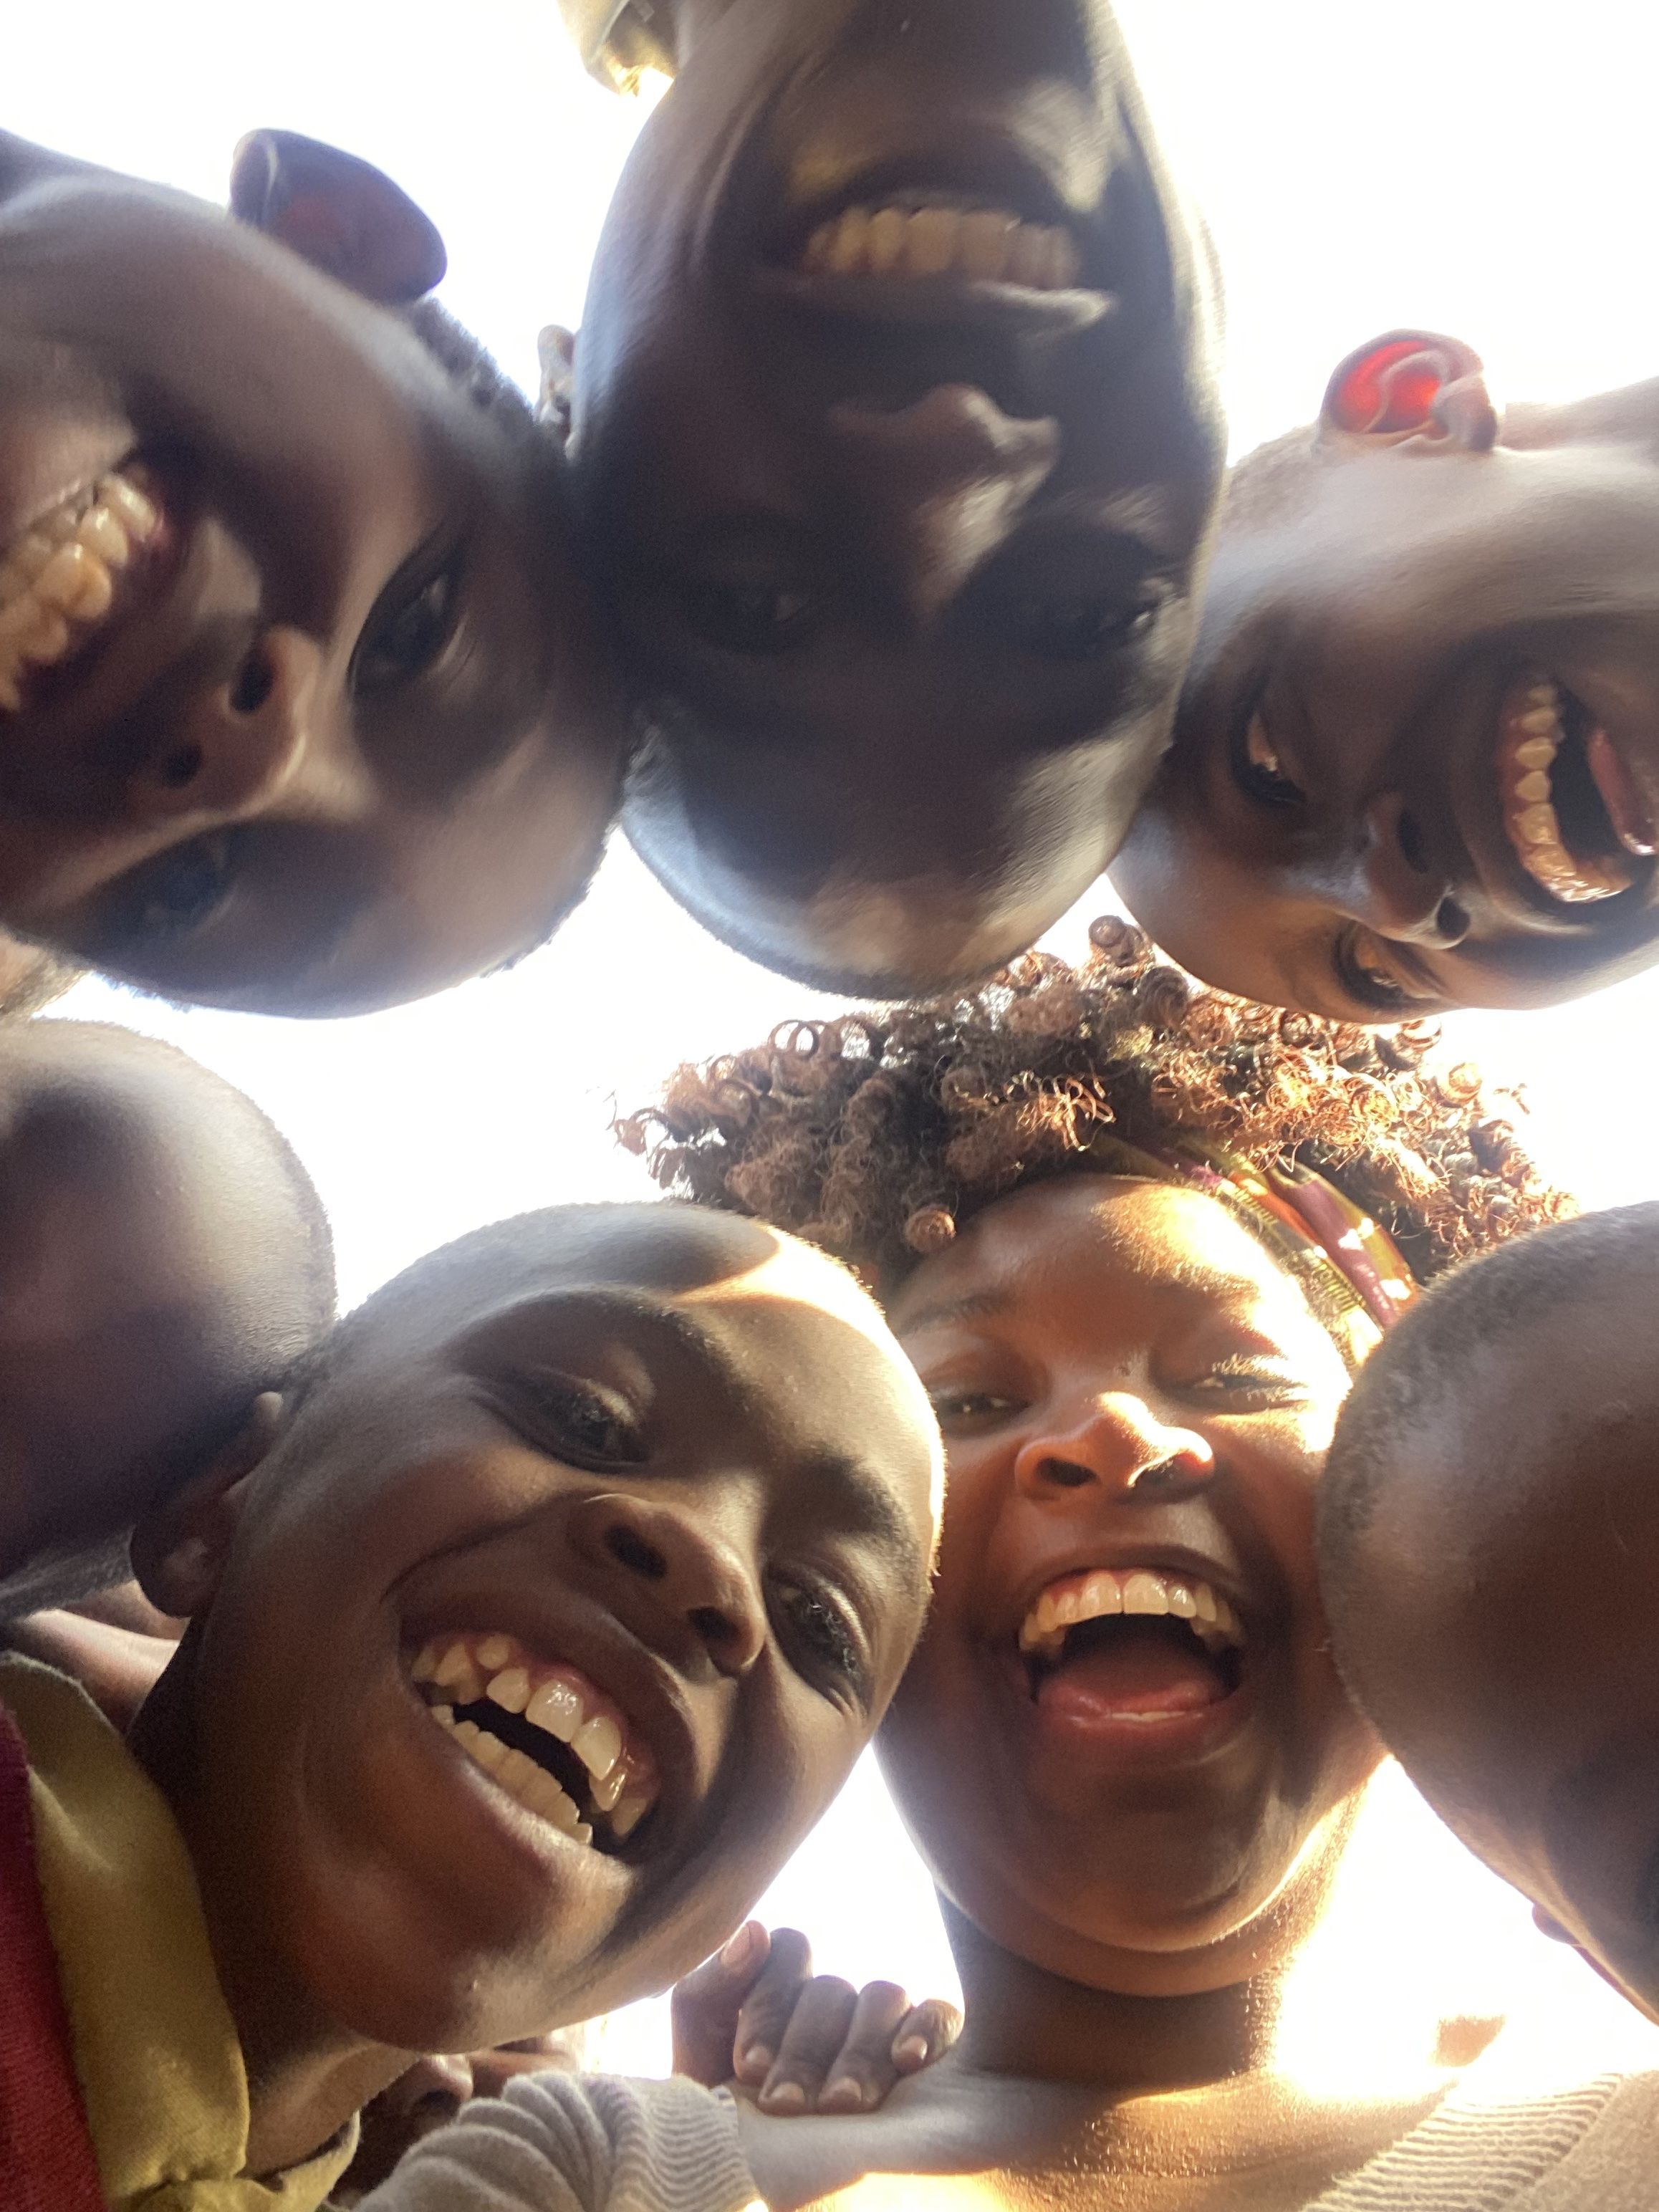 Selfie time after a conservation class with club members from Kimanjo Primary School.